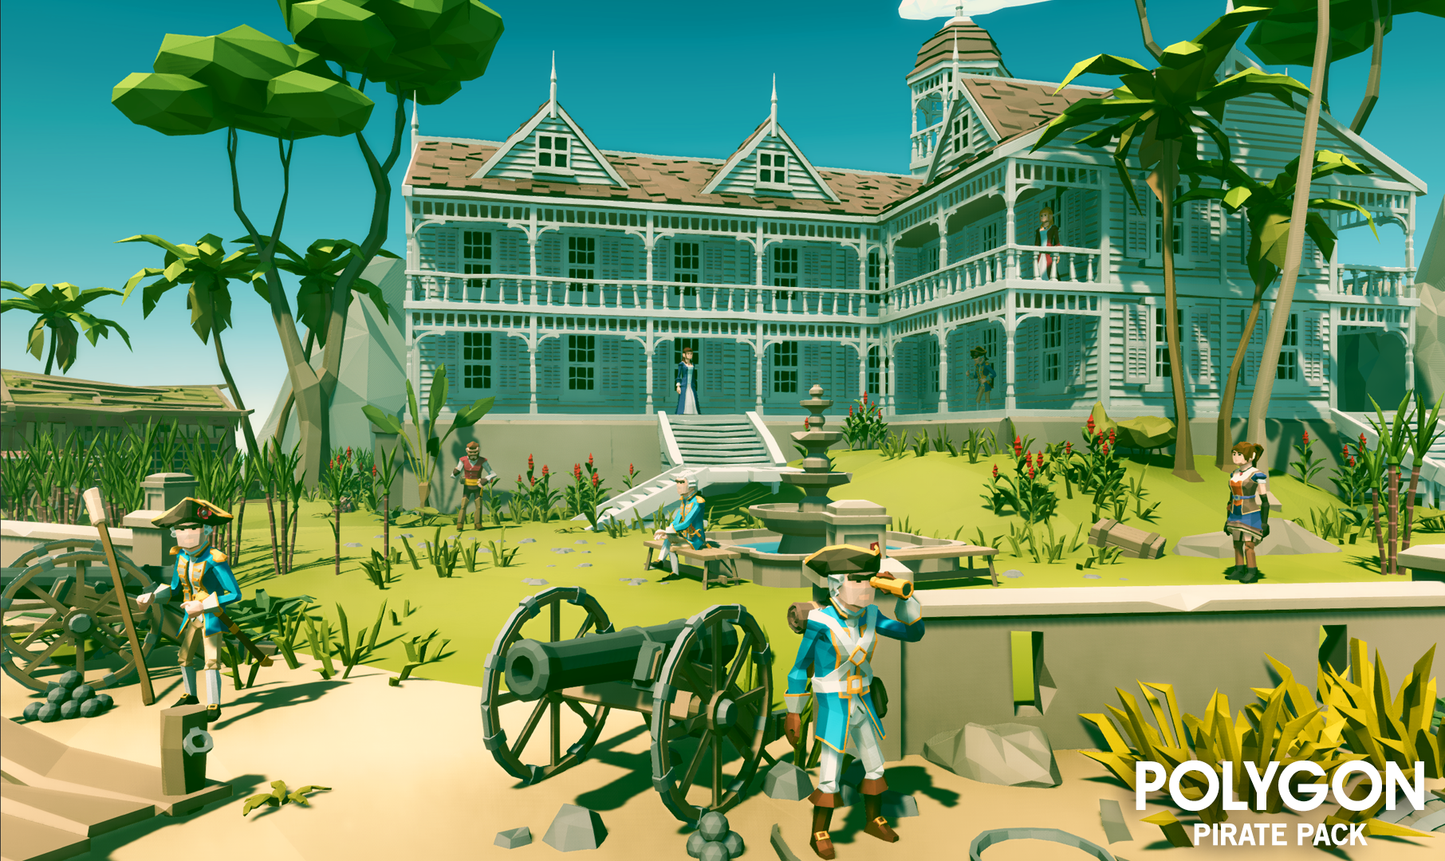 POLYGON - Pirate Pack - Synty Studios - Unity and Unreal 3D low poly assets for game development